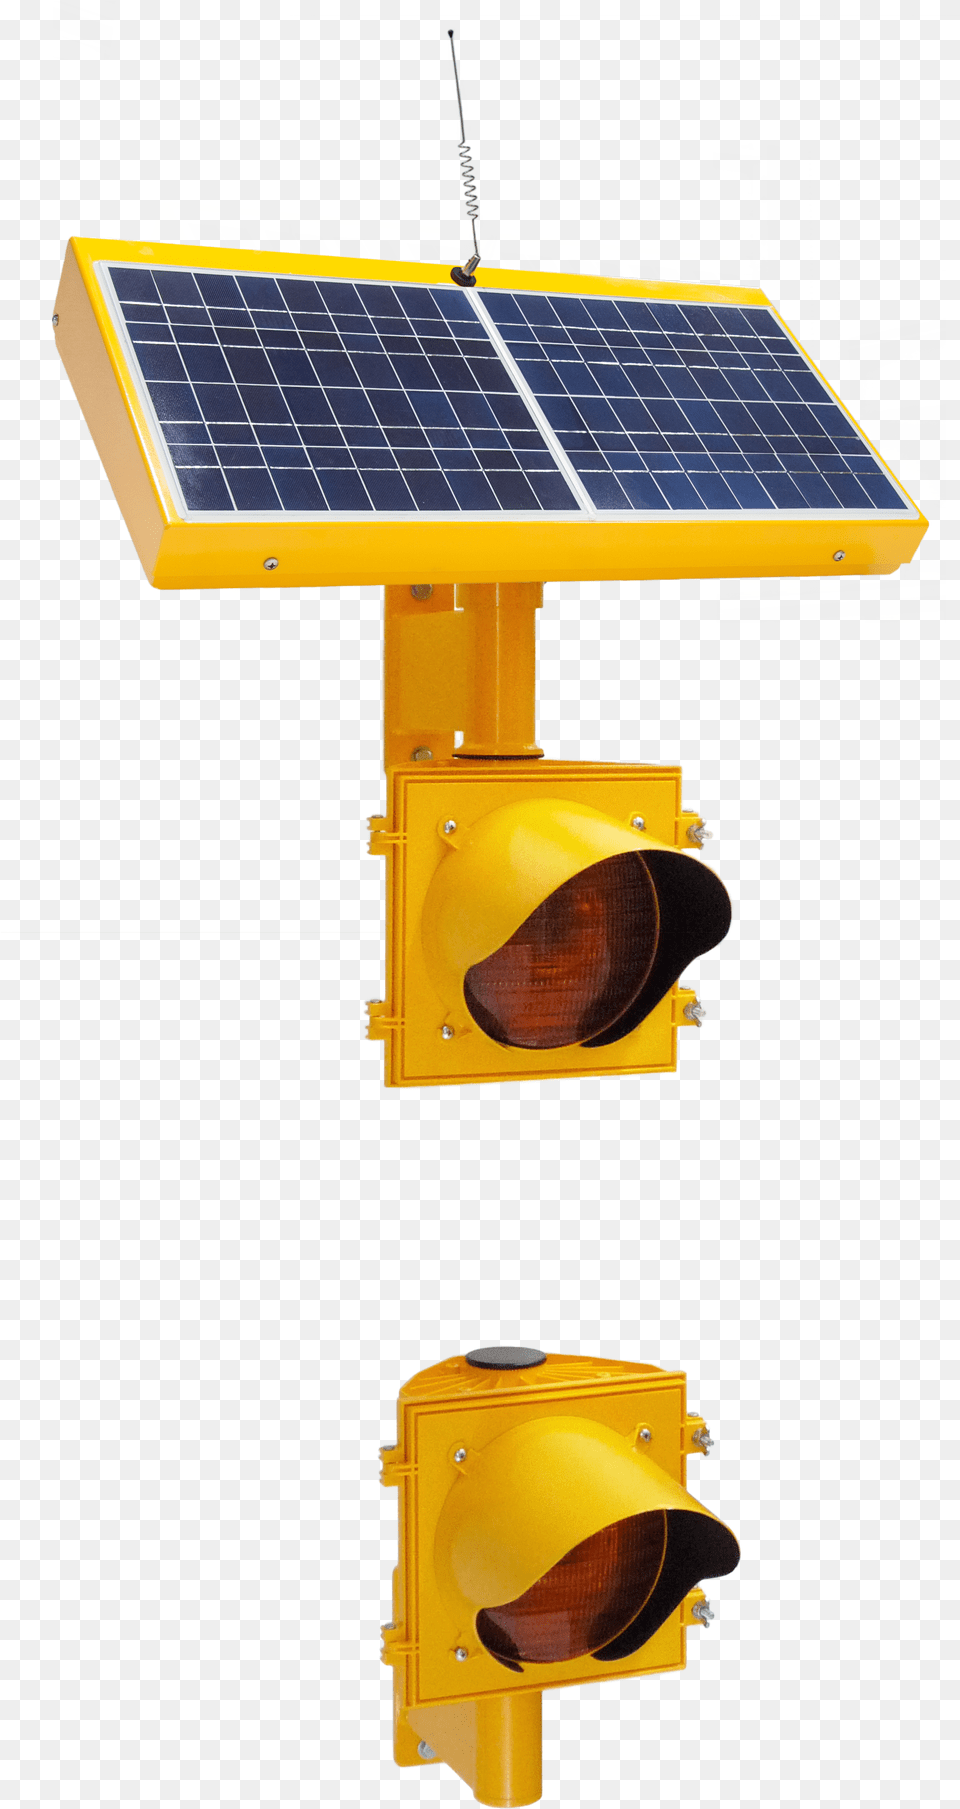 Ab 7408 Pedestrian Activated Crosswalk Systems Orange Traffic Light, Electrical Device, Solar Panels, Traffic Light Free Transparent Png